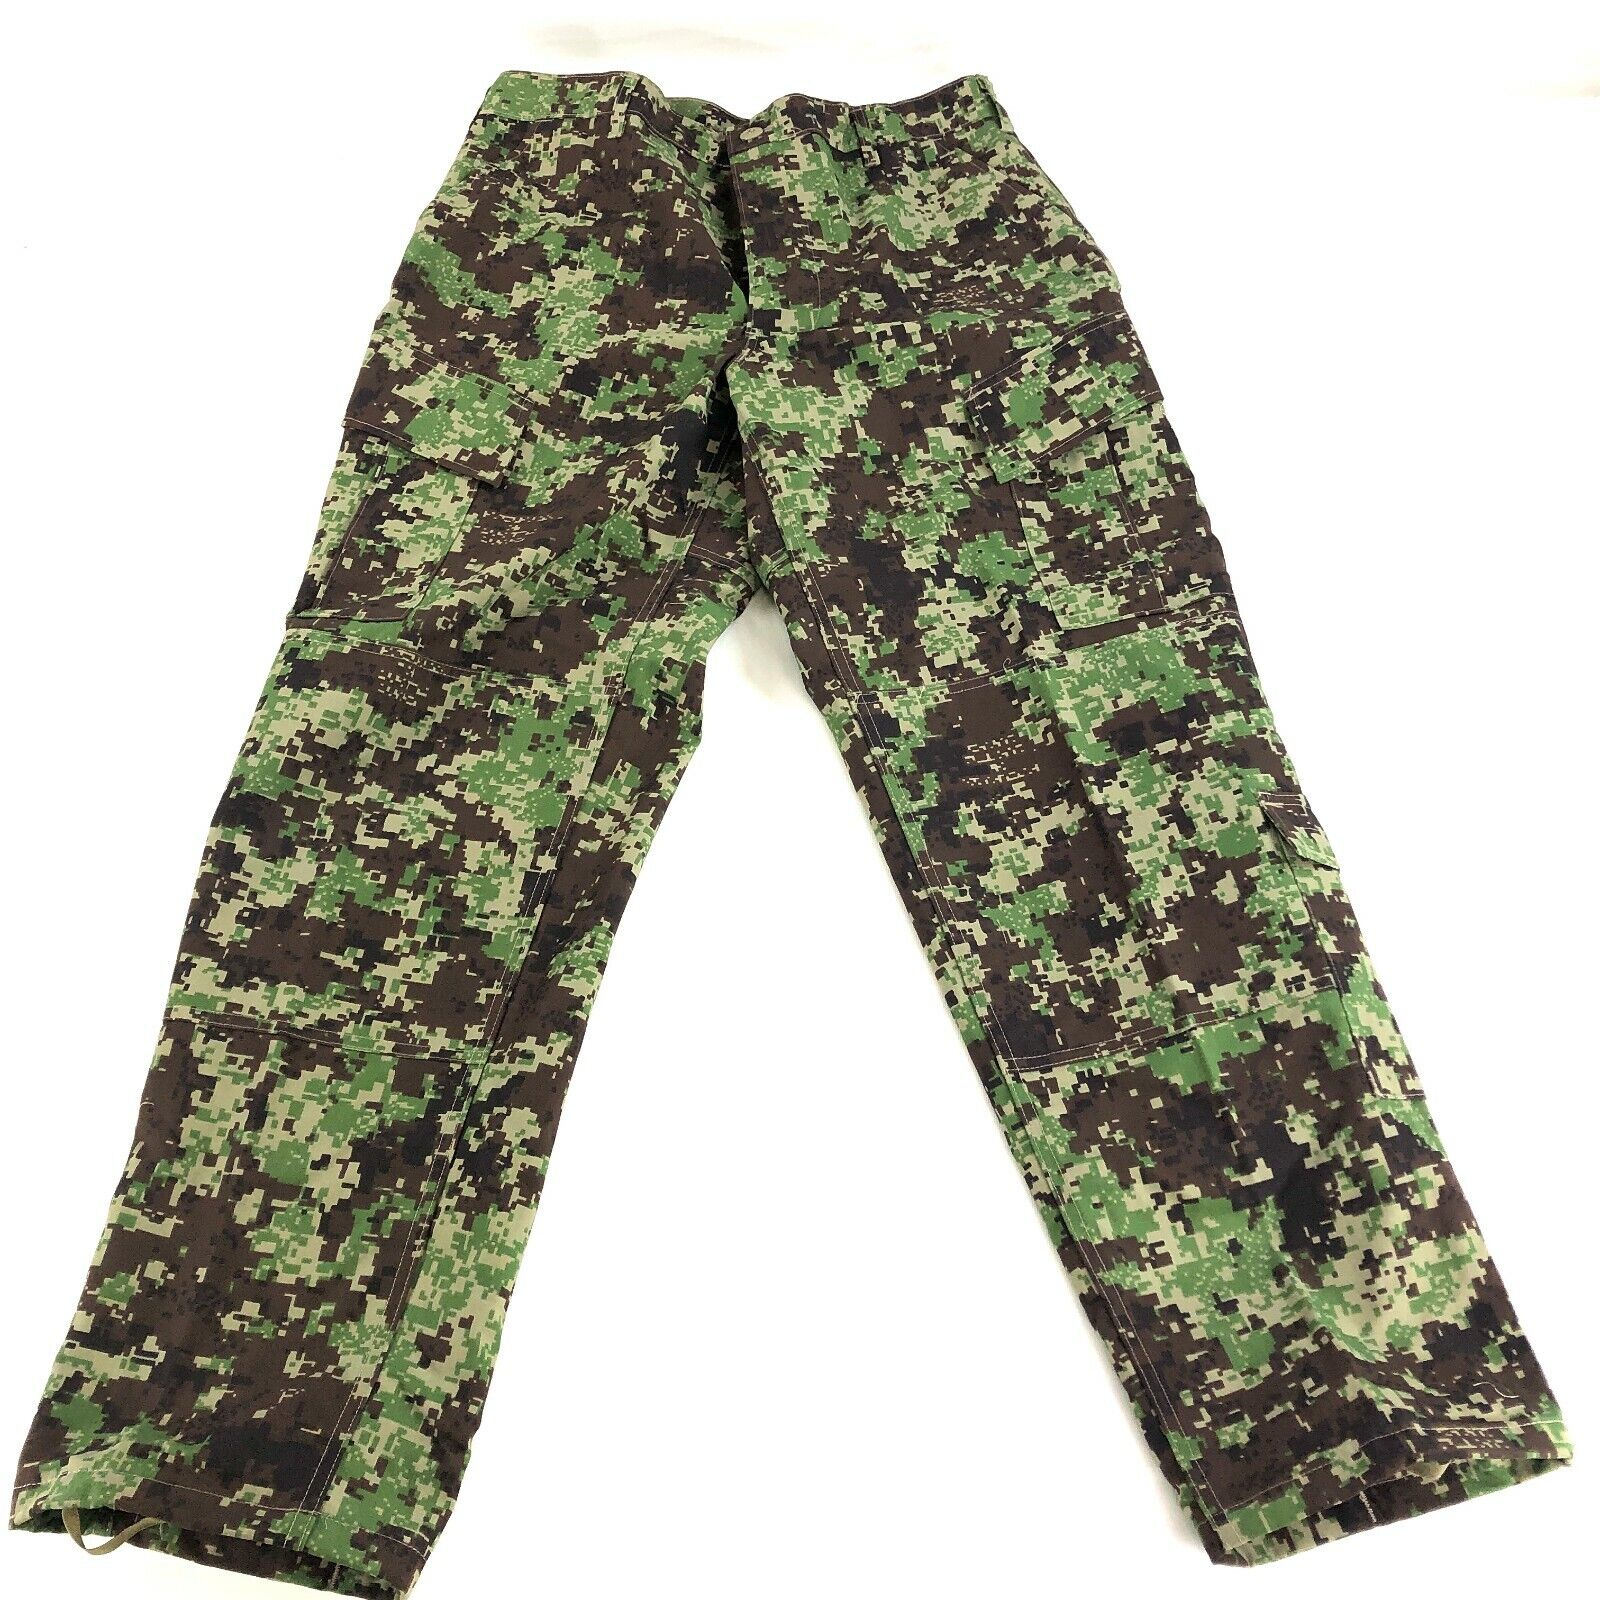 ANA Afghan Army Combat Pants, Hyperstealth Spec4ce Forest Uniform MEDIUM LONG